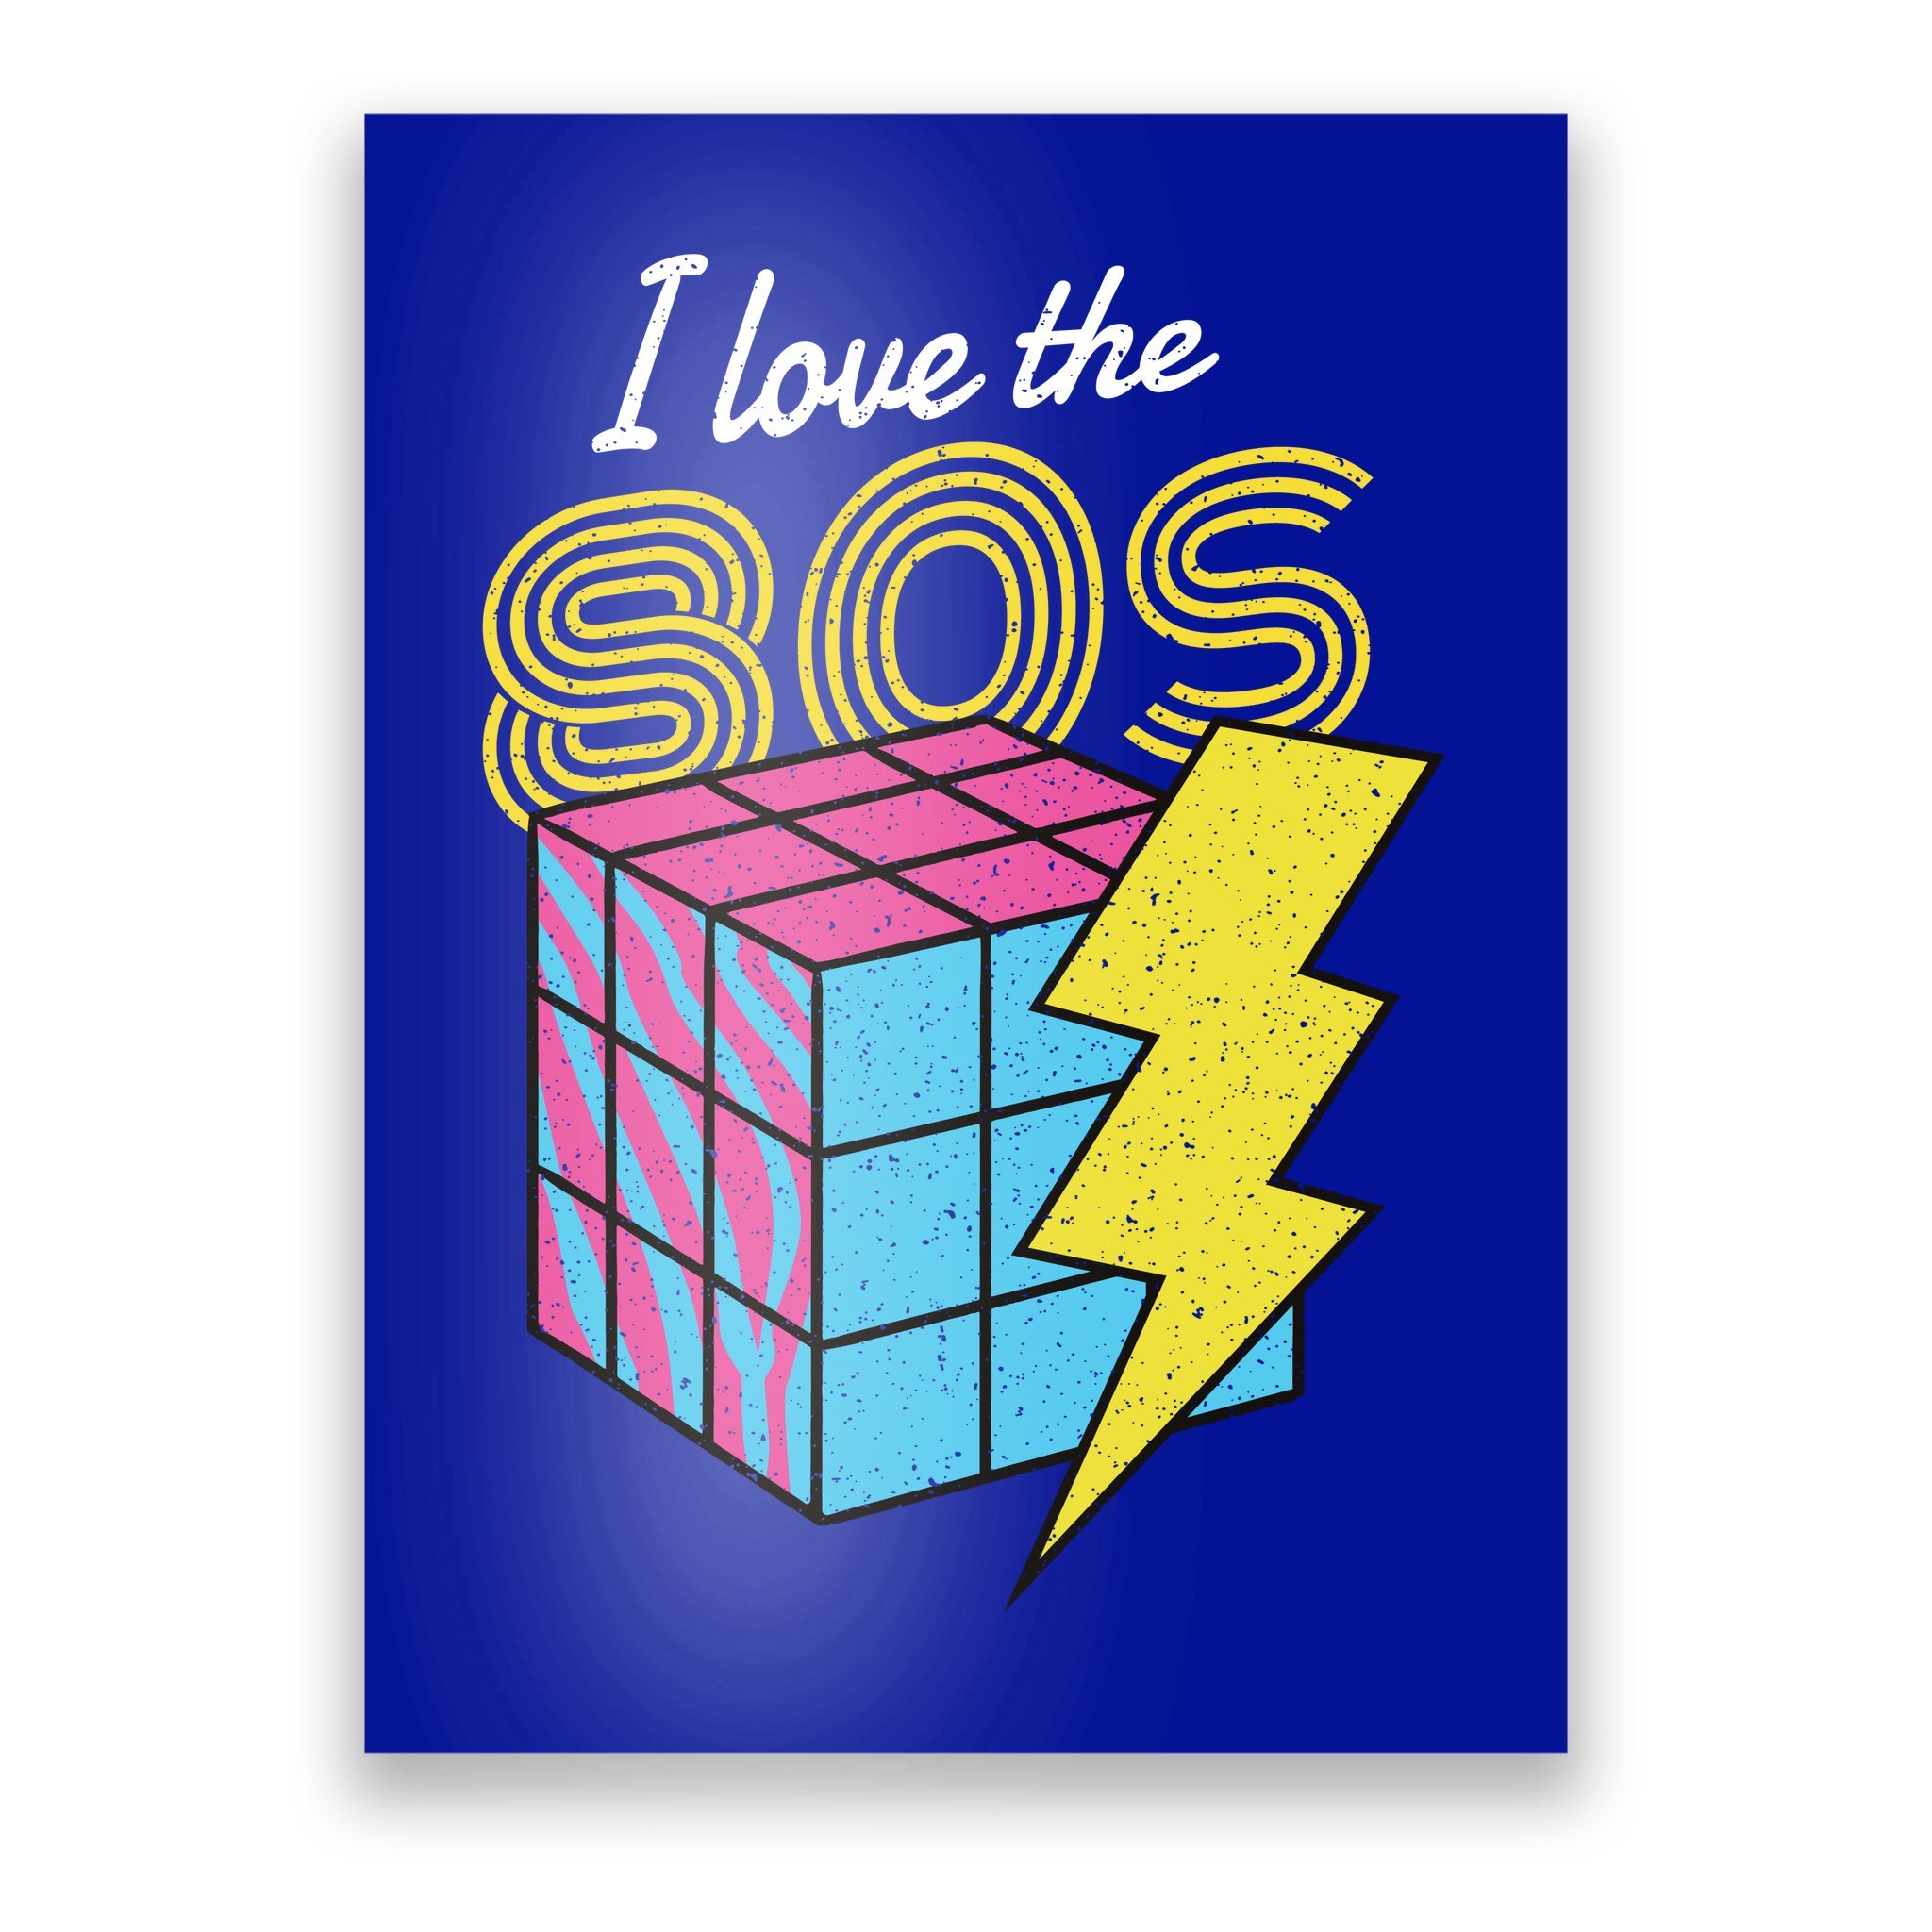 Rubik's Cube Love the 80's HD POSTER 